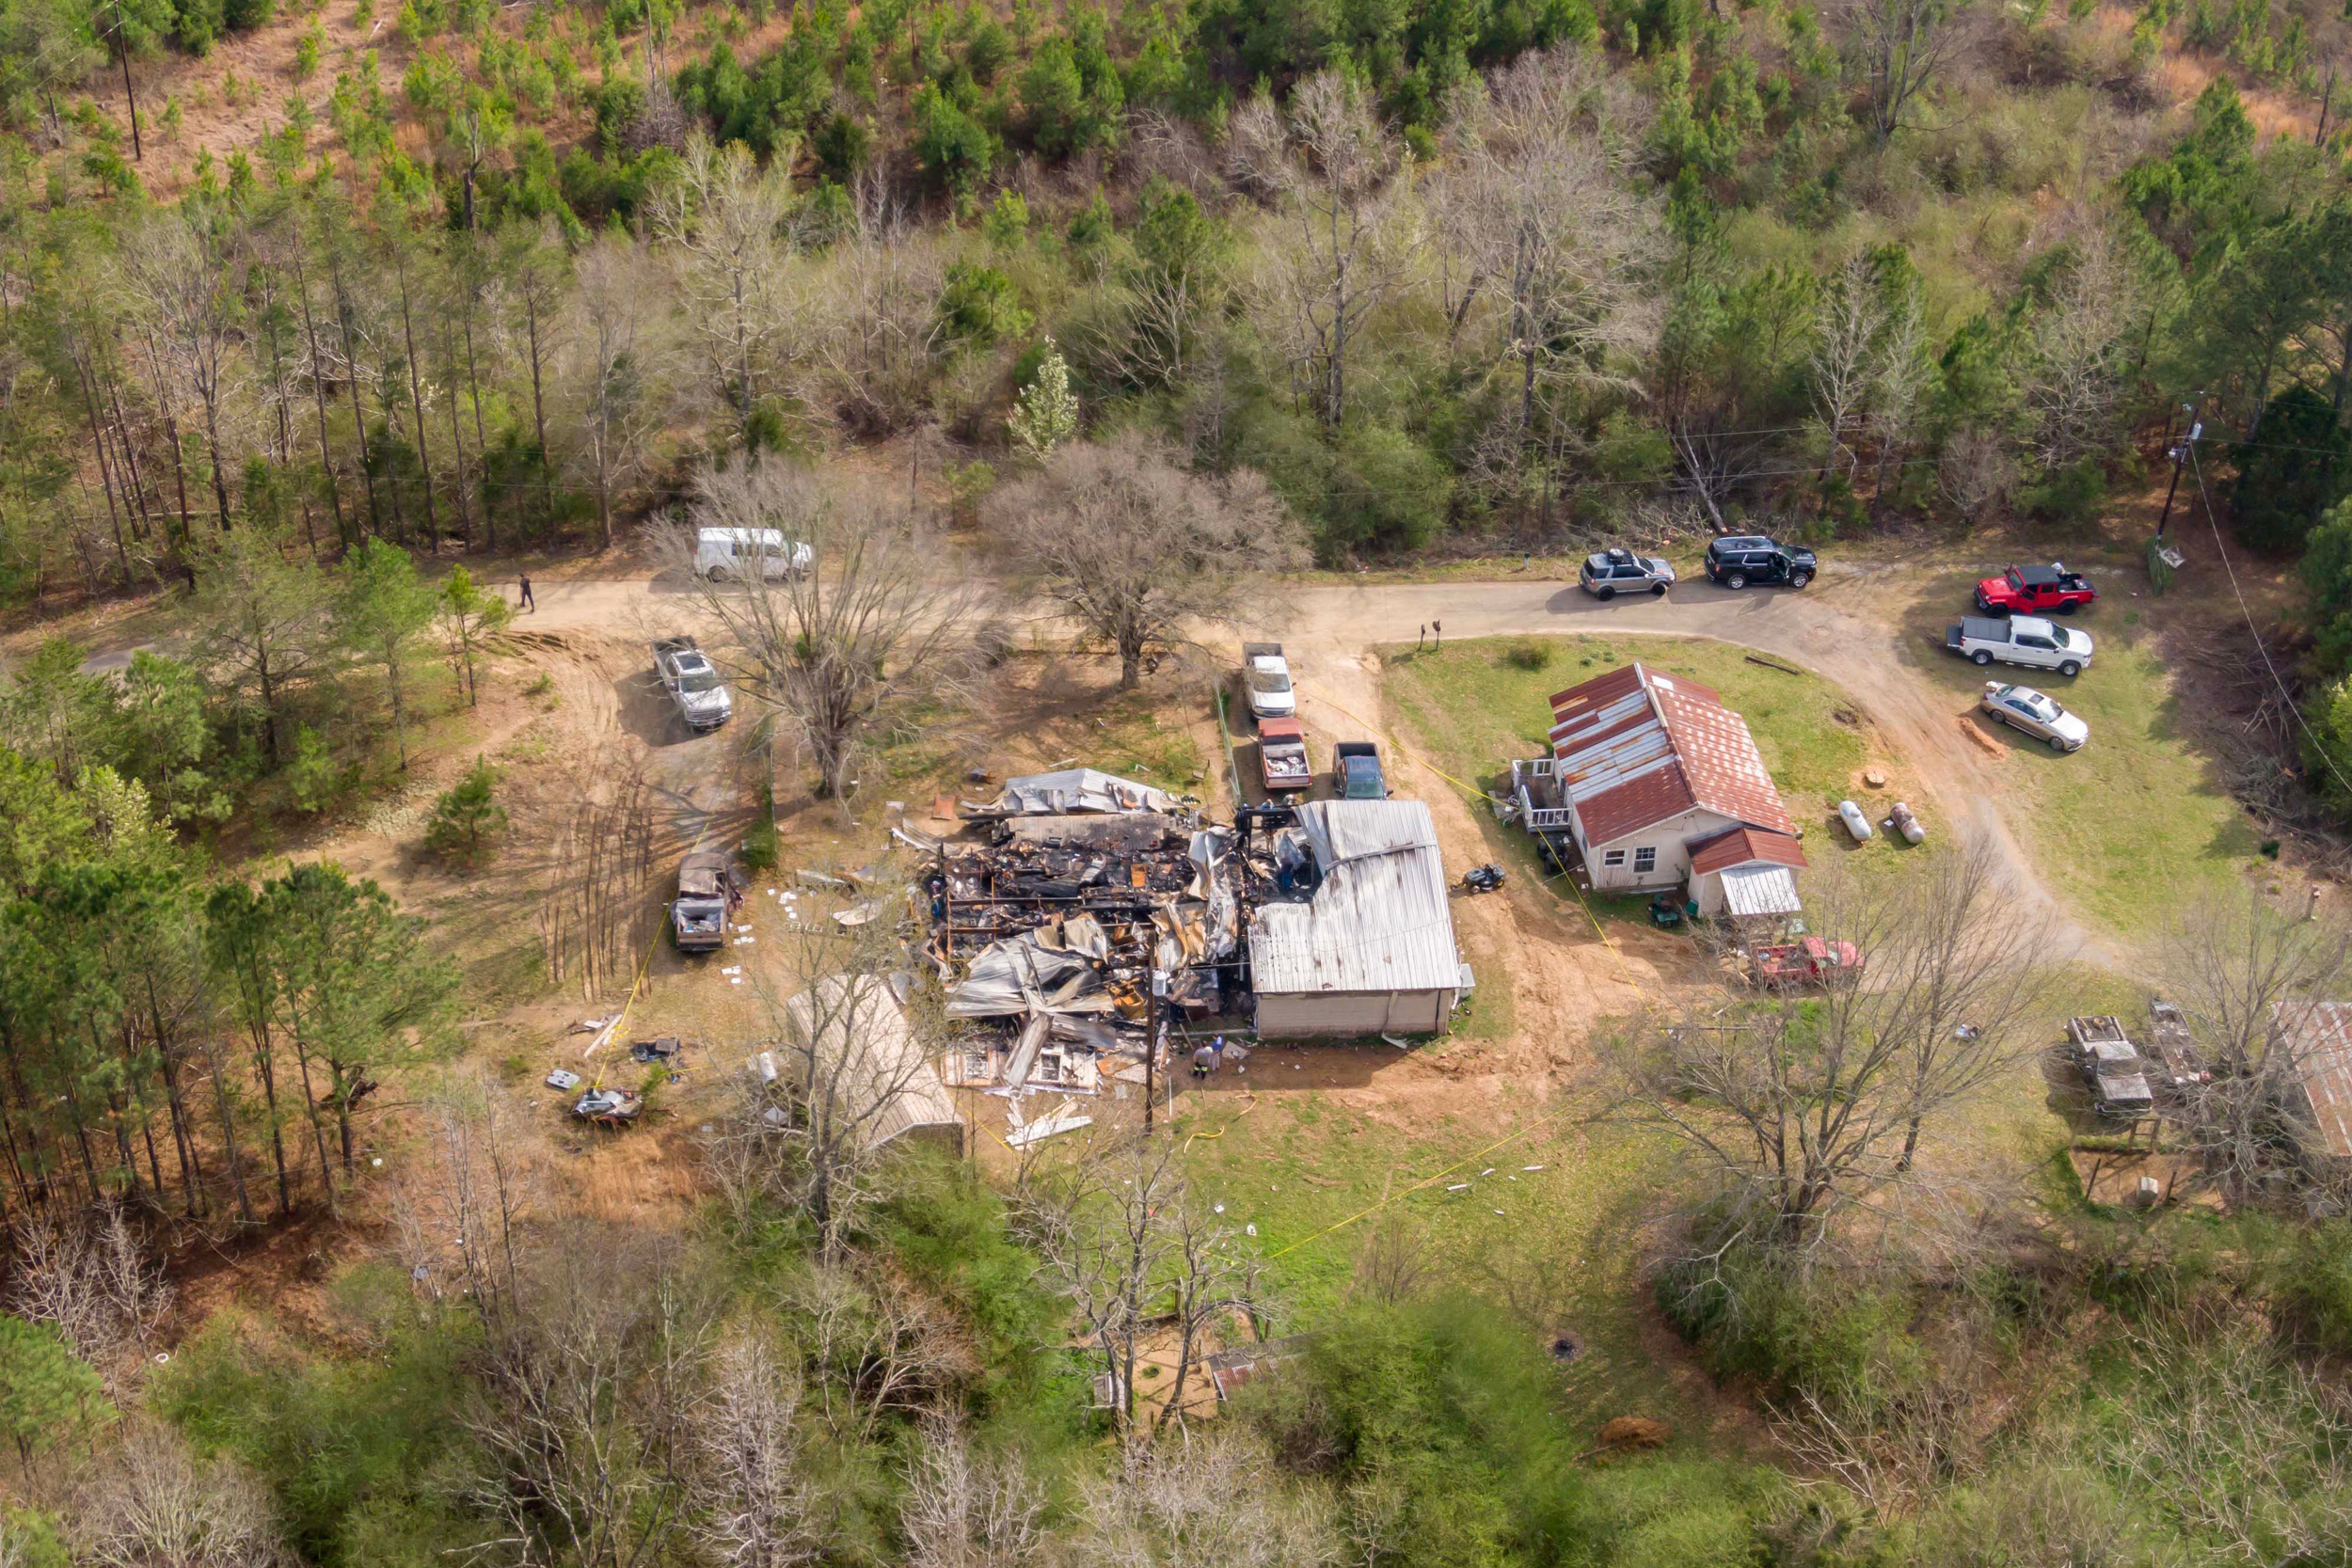 Griffice's lawyer blames the release of methane gas from an underground mine for the explosion. Credit: Lee Hedgepeth/Inside Climate News